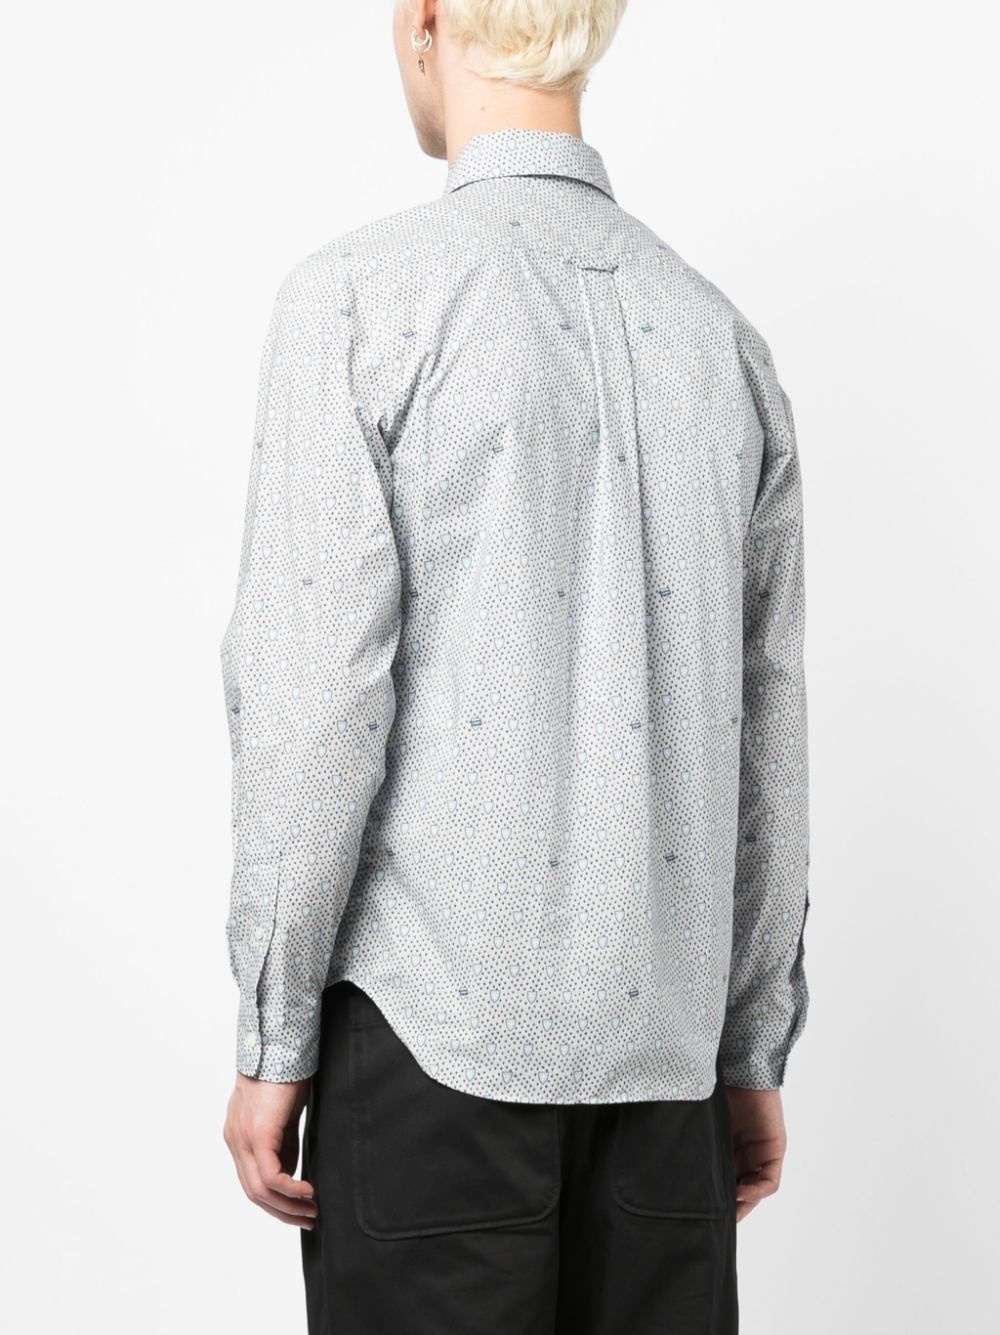 CLASSIC SHIRT IN SHIELD PRINTED COTTON - 7